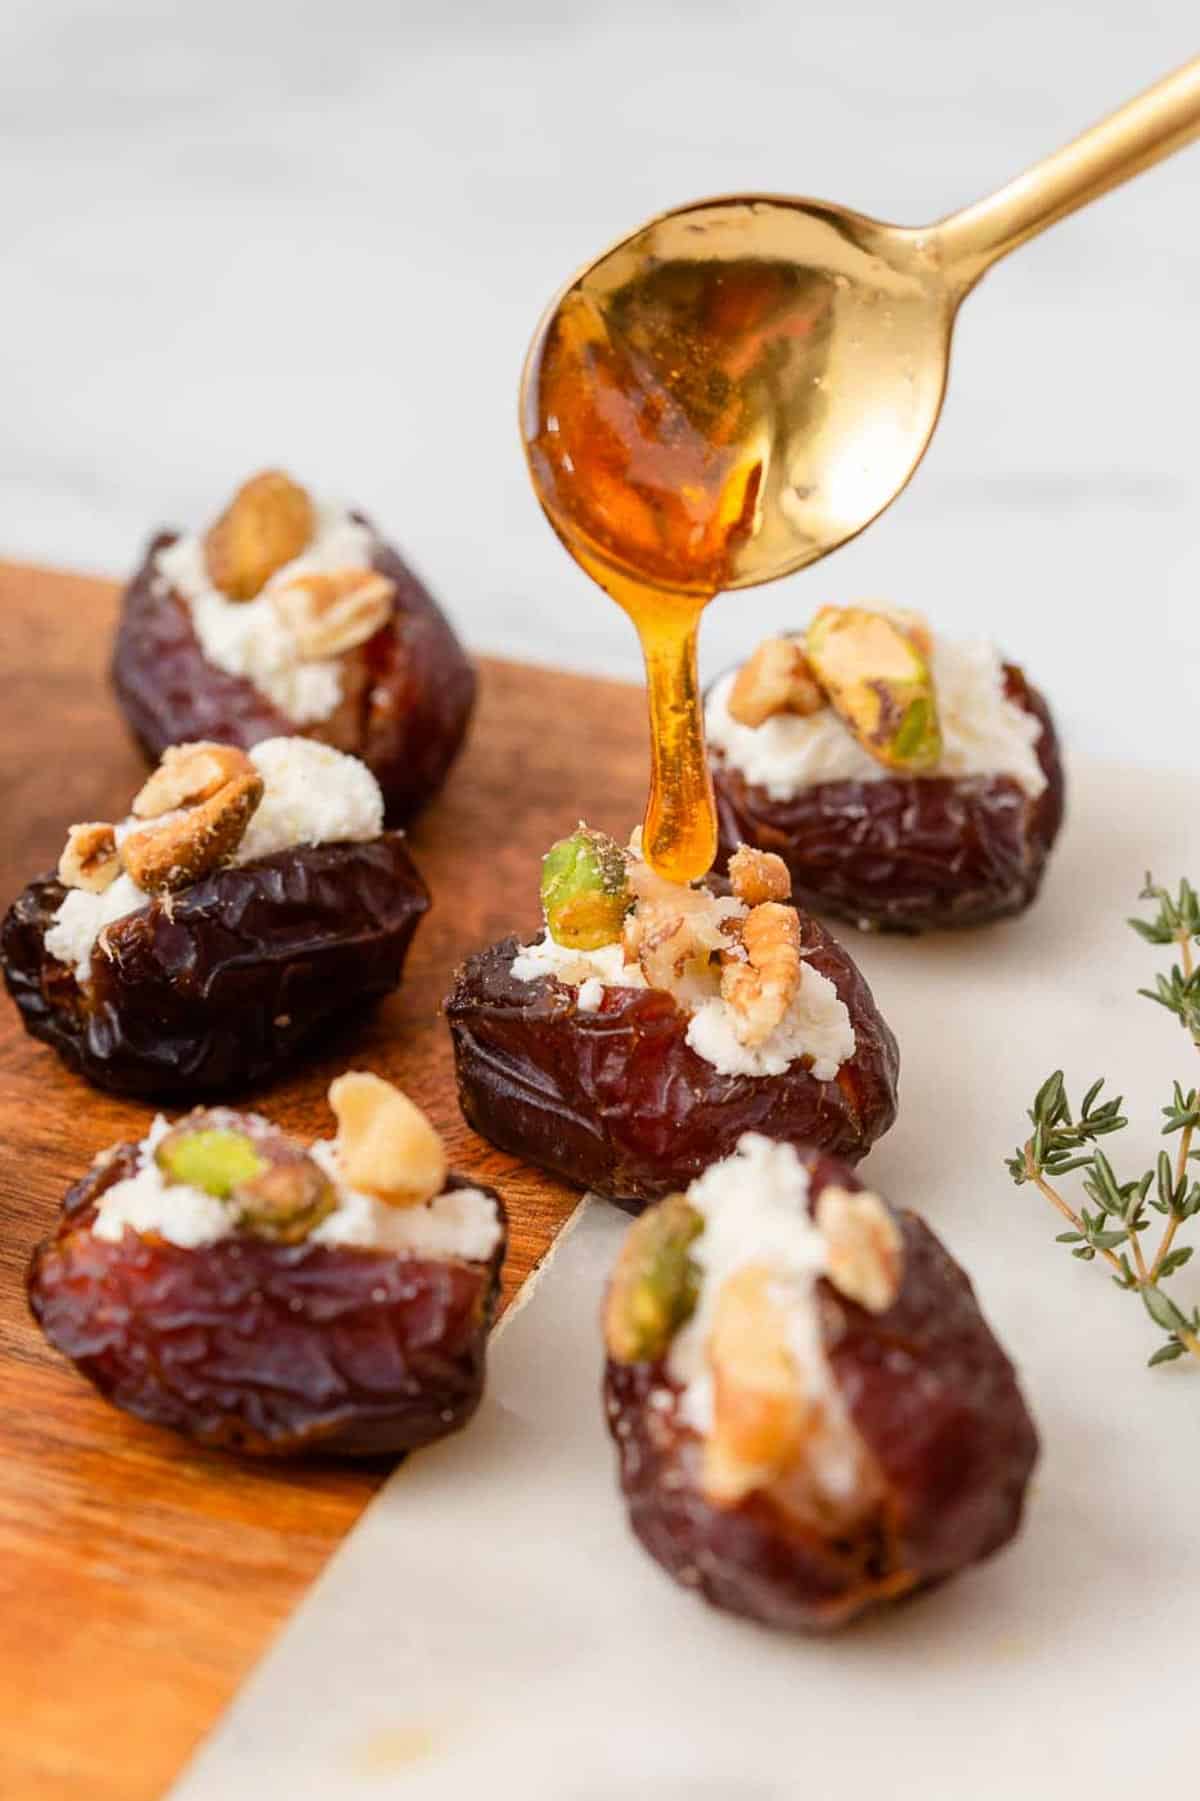 Stuffed dates drizzled with honey.